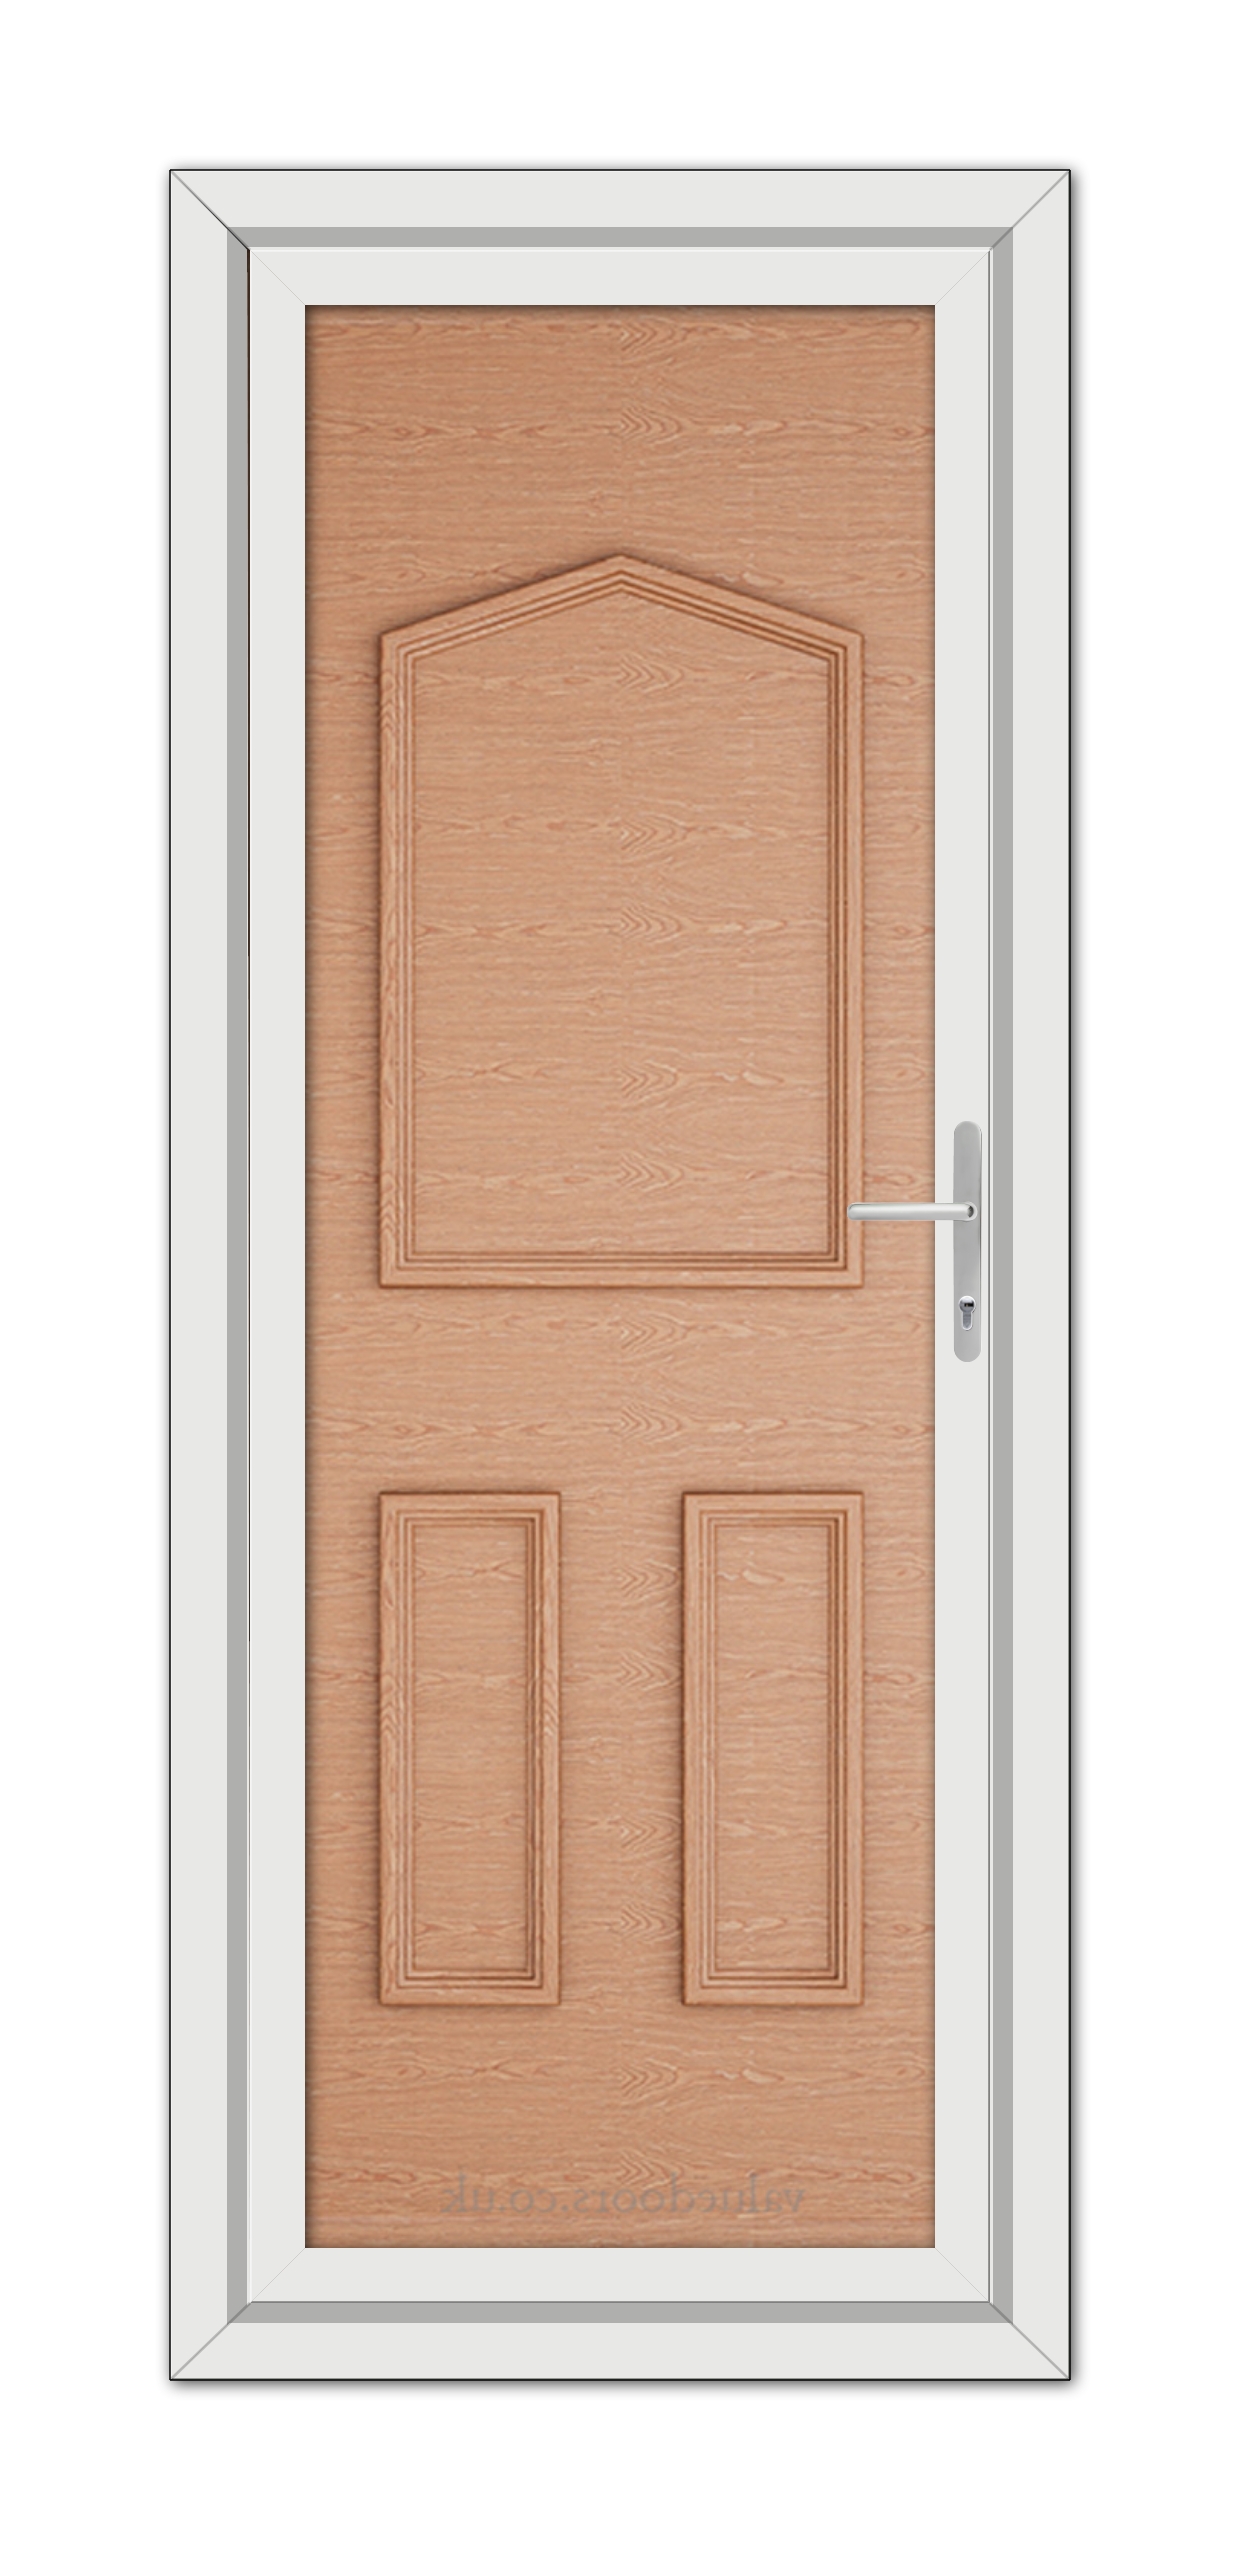 A Irish Oak Oxford Solid uPVC door with a metallic handle, framed by a white door frame, viewed from the front.